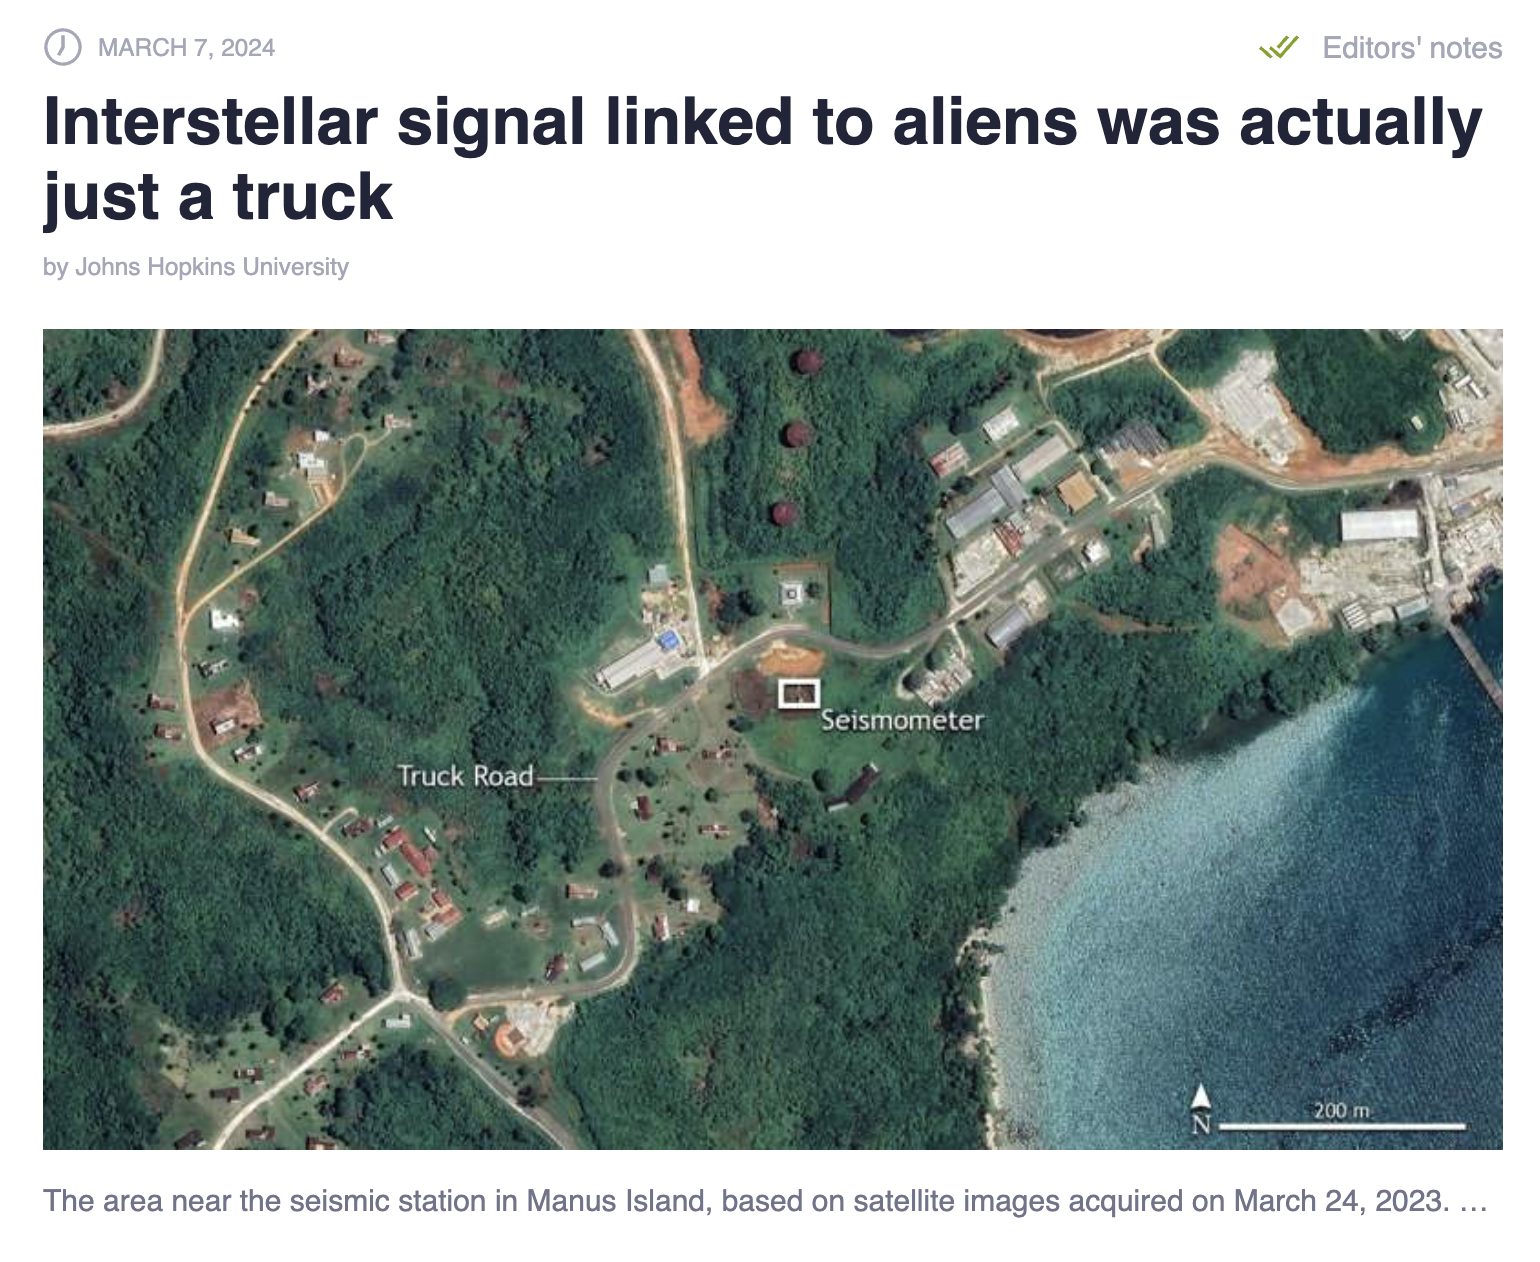 water resources - Editors' notes Interstellar signal linked to aliens was actually just a truck by Johns Hopkins University Truck Road O Seismometer 200m The area near the seismic station in Manus Island, based on satellite images acquired on ....